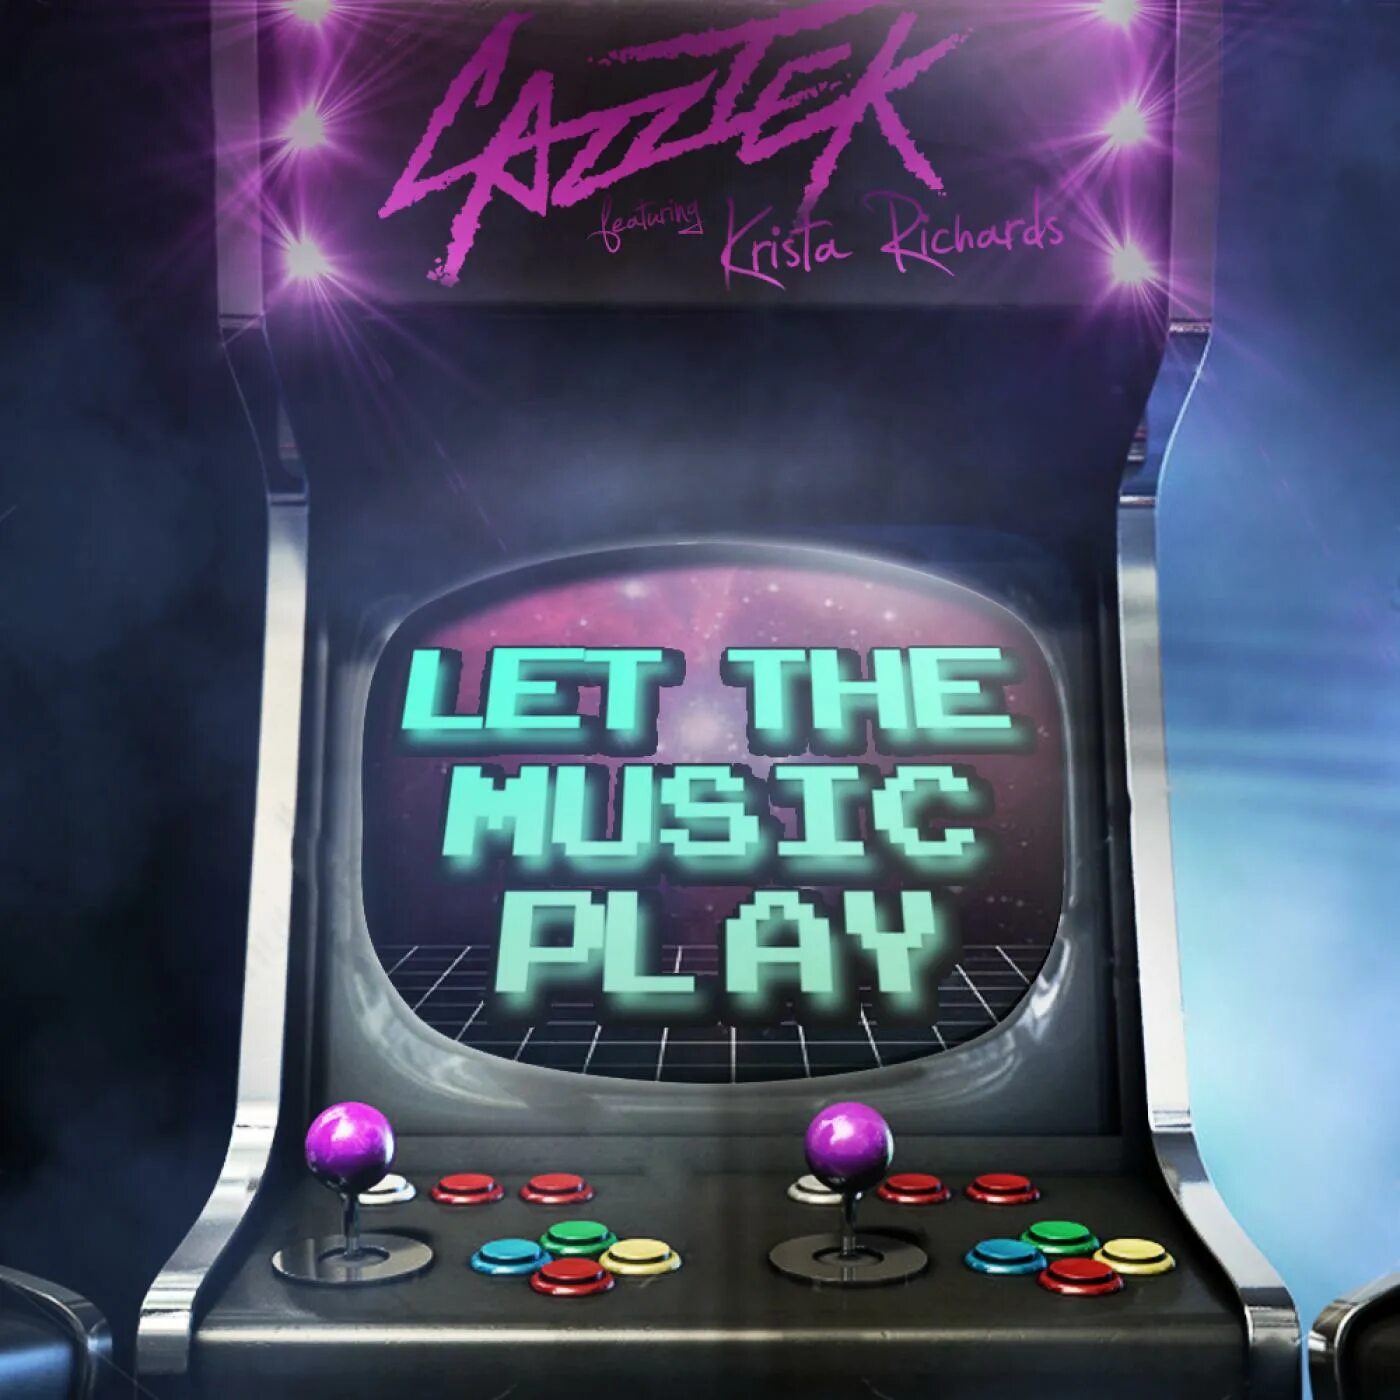 Let the Music Play. Let the Music Play картинка. Cazztek - Launch 2015. Kazadi Let the Music Play. Feat играть